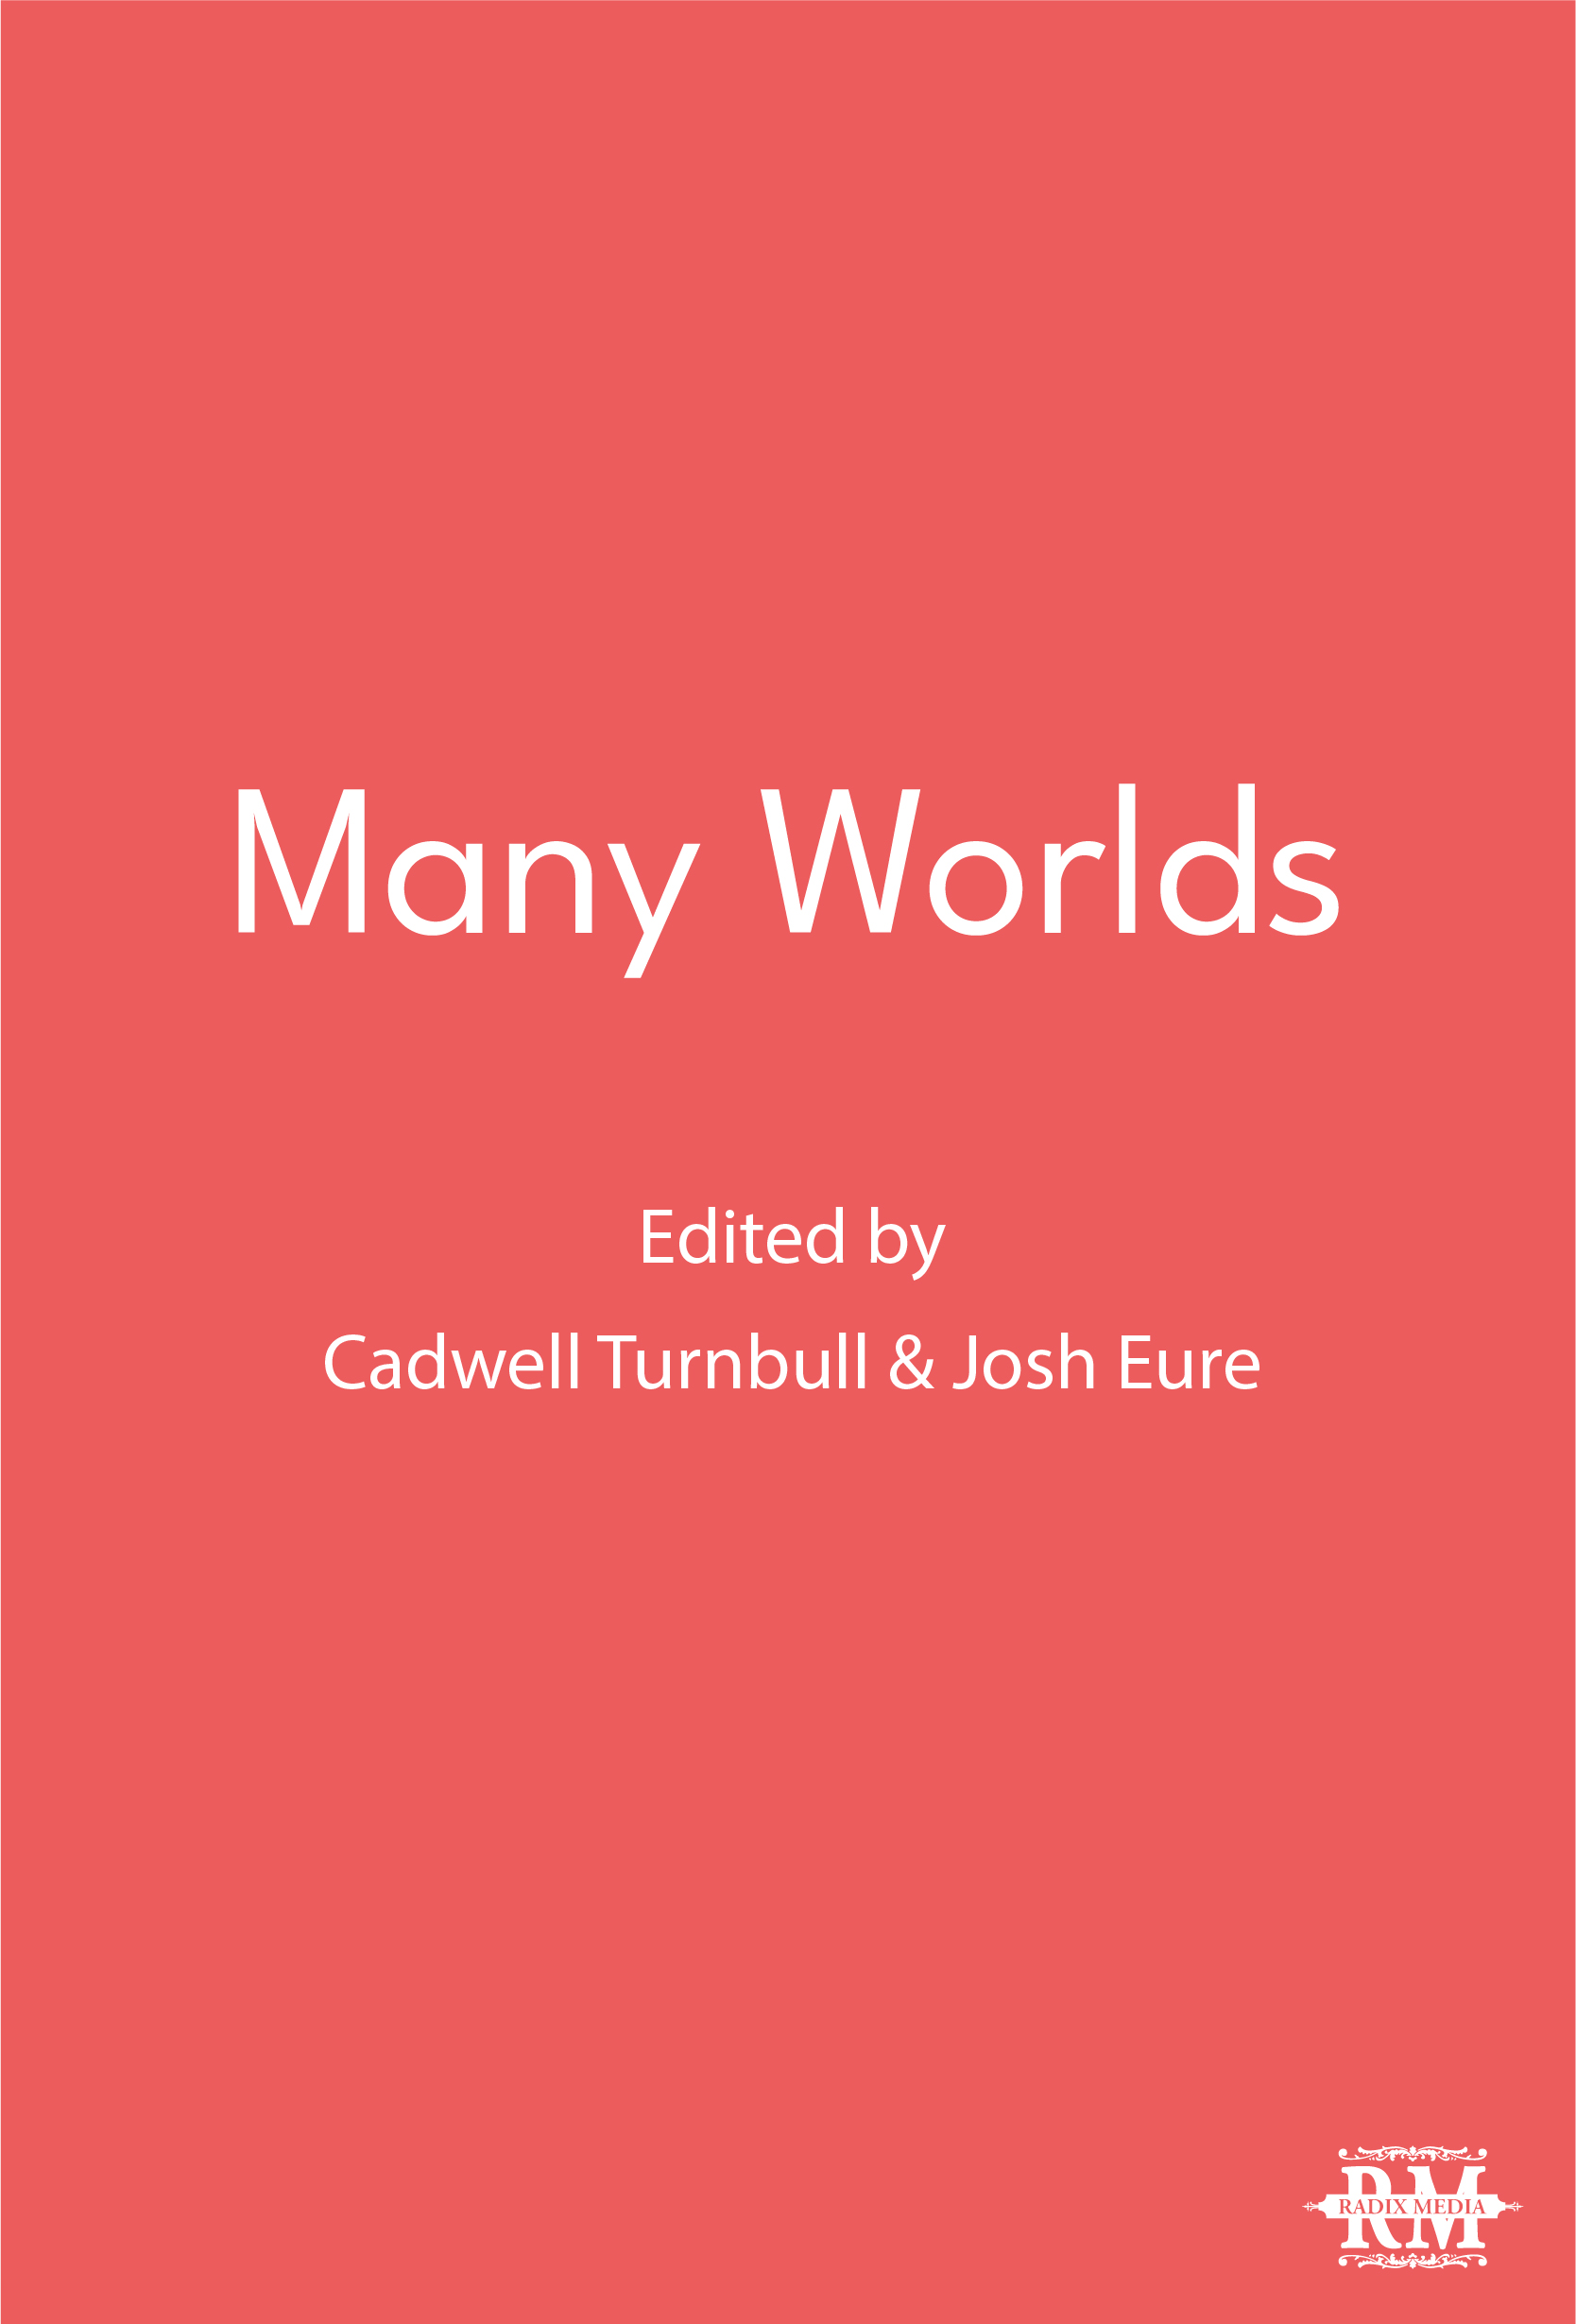 Many Worlds, an anthology edited by Cadwell Turnbull and Josh Eure